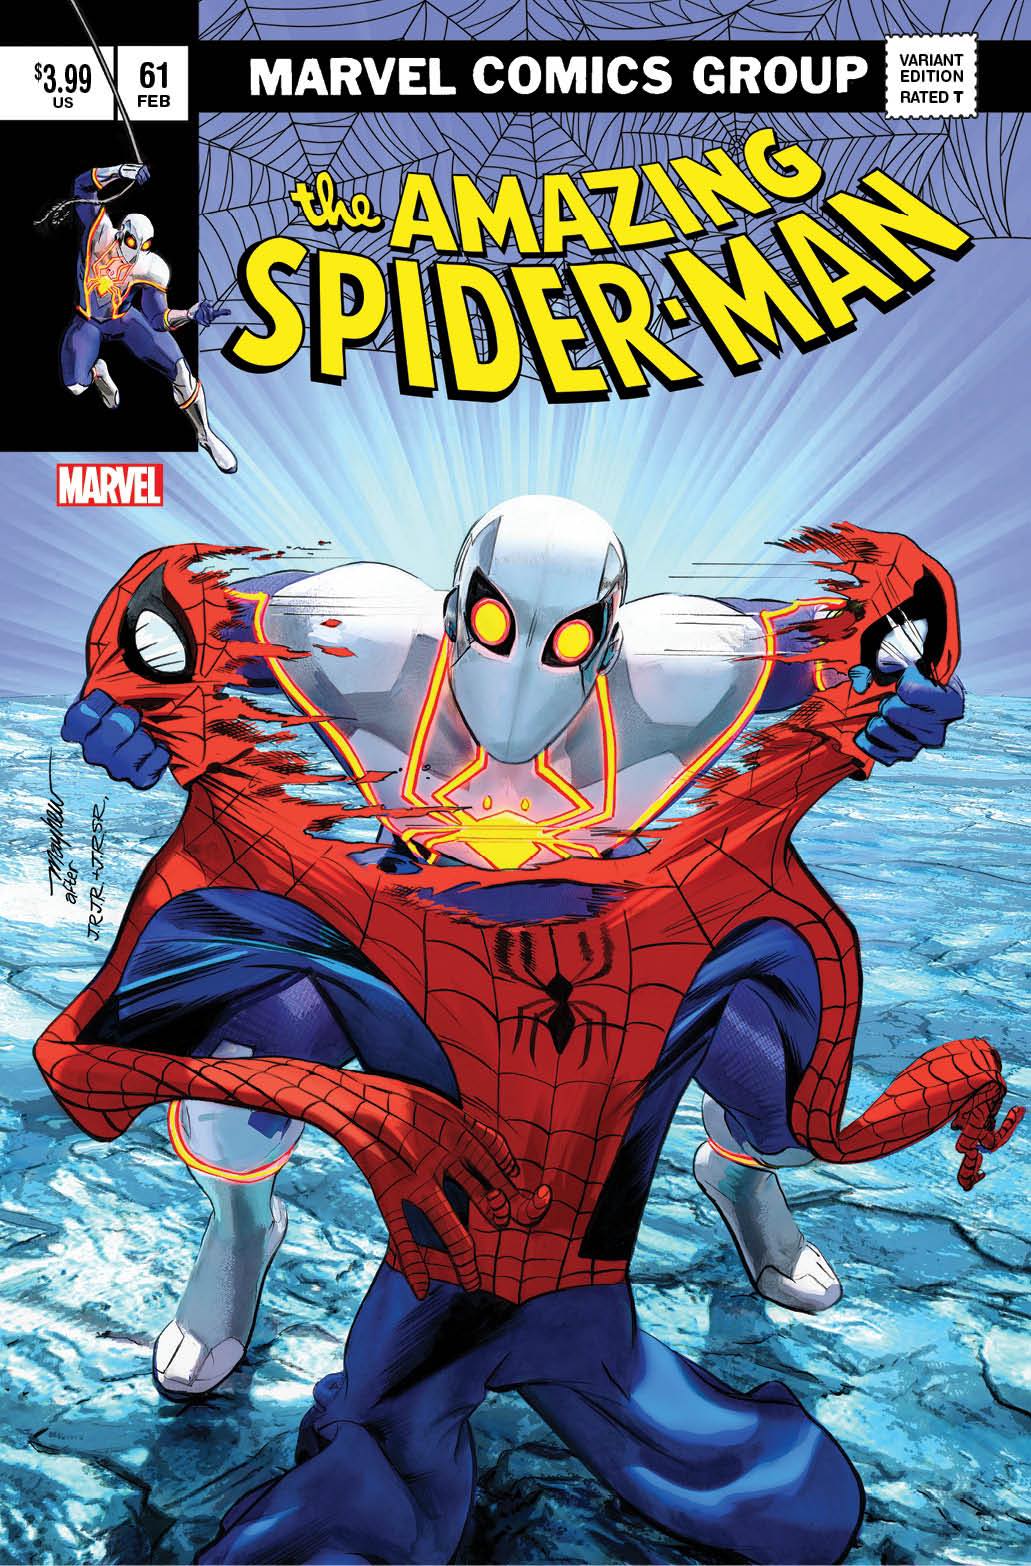 AMAZING SPIDER-MAN #61 MIKE MAYHEW ASM 238 HOMAGE VARIANT LIMITED TO 800 WITH NUMBERED COA